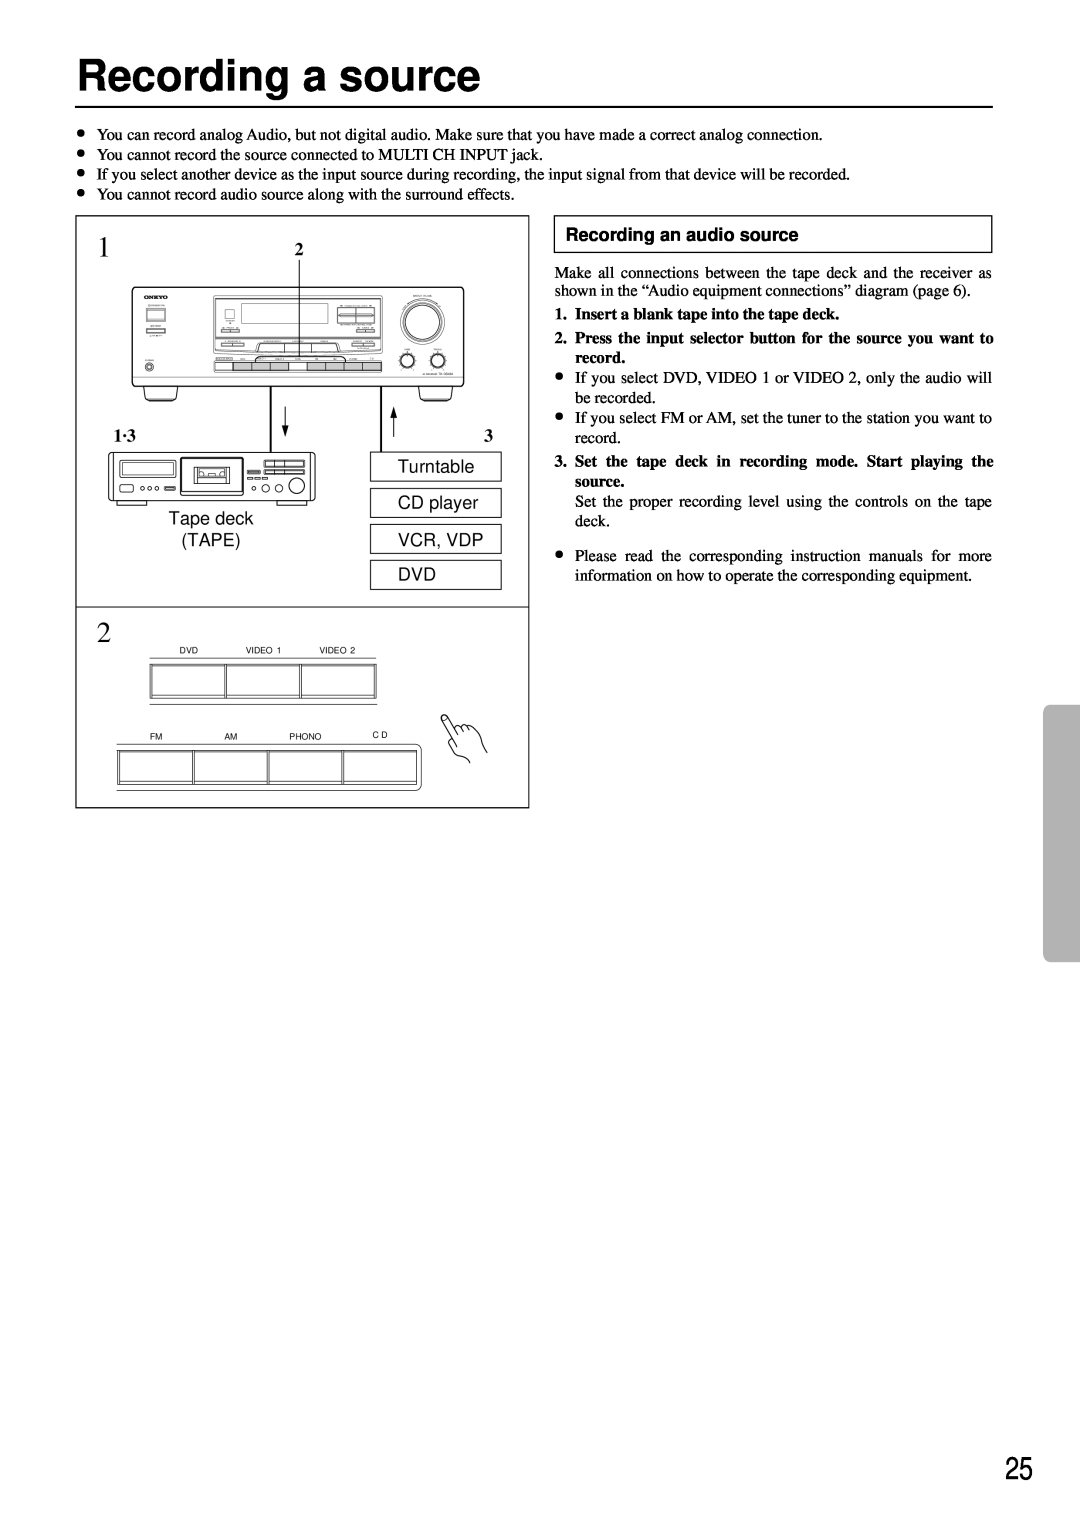 Onkyo TX-DS484 instruction manual Recording a source, Turntable, Tape deck, CD player, Vcr, Vdp, Recording an audio source 